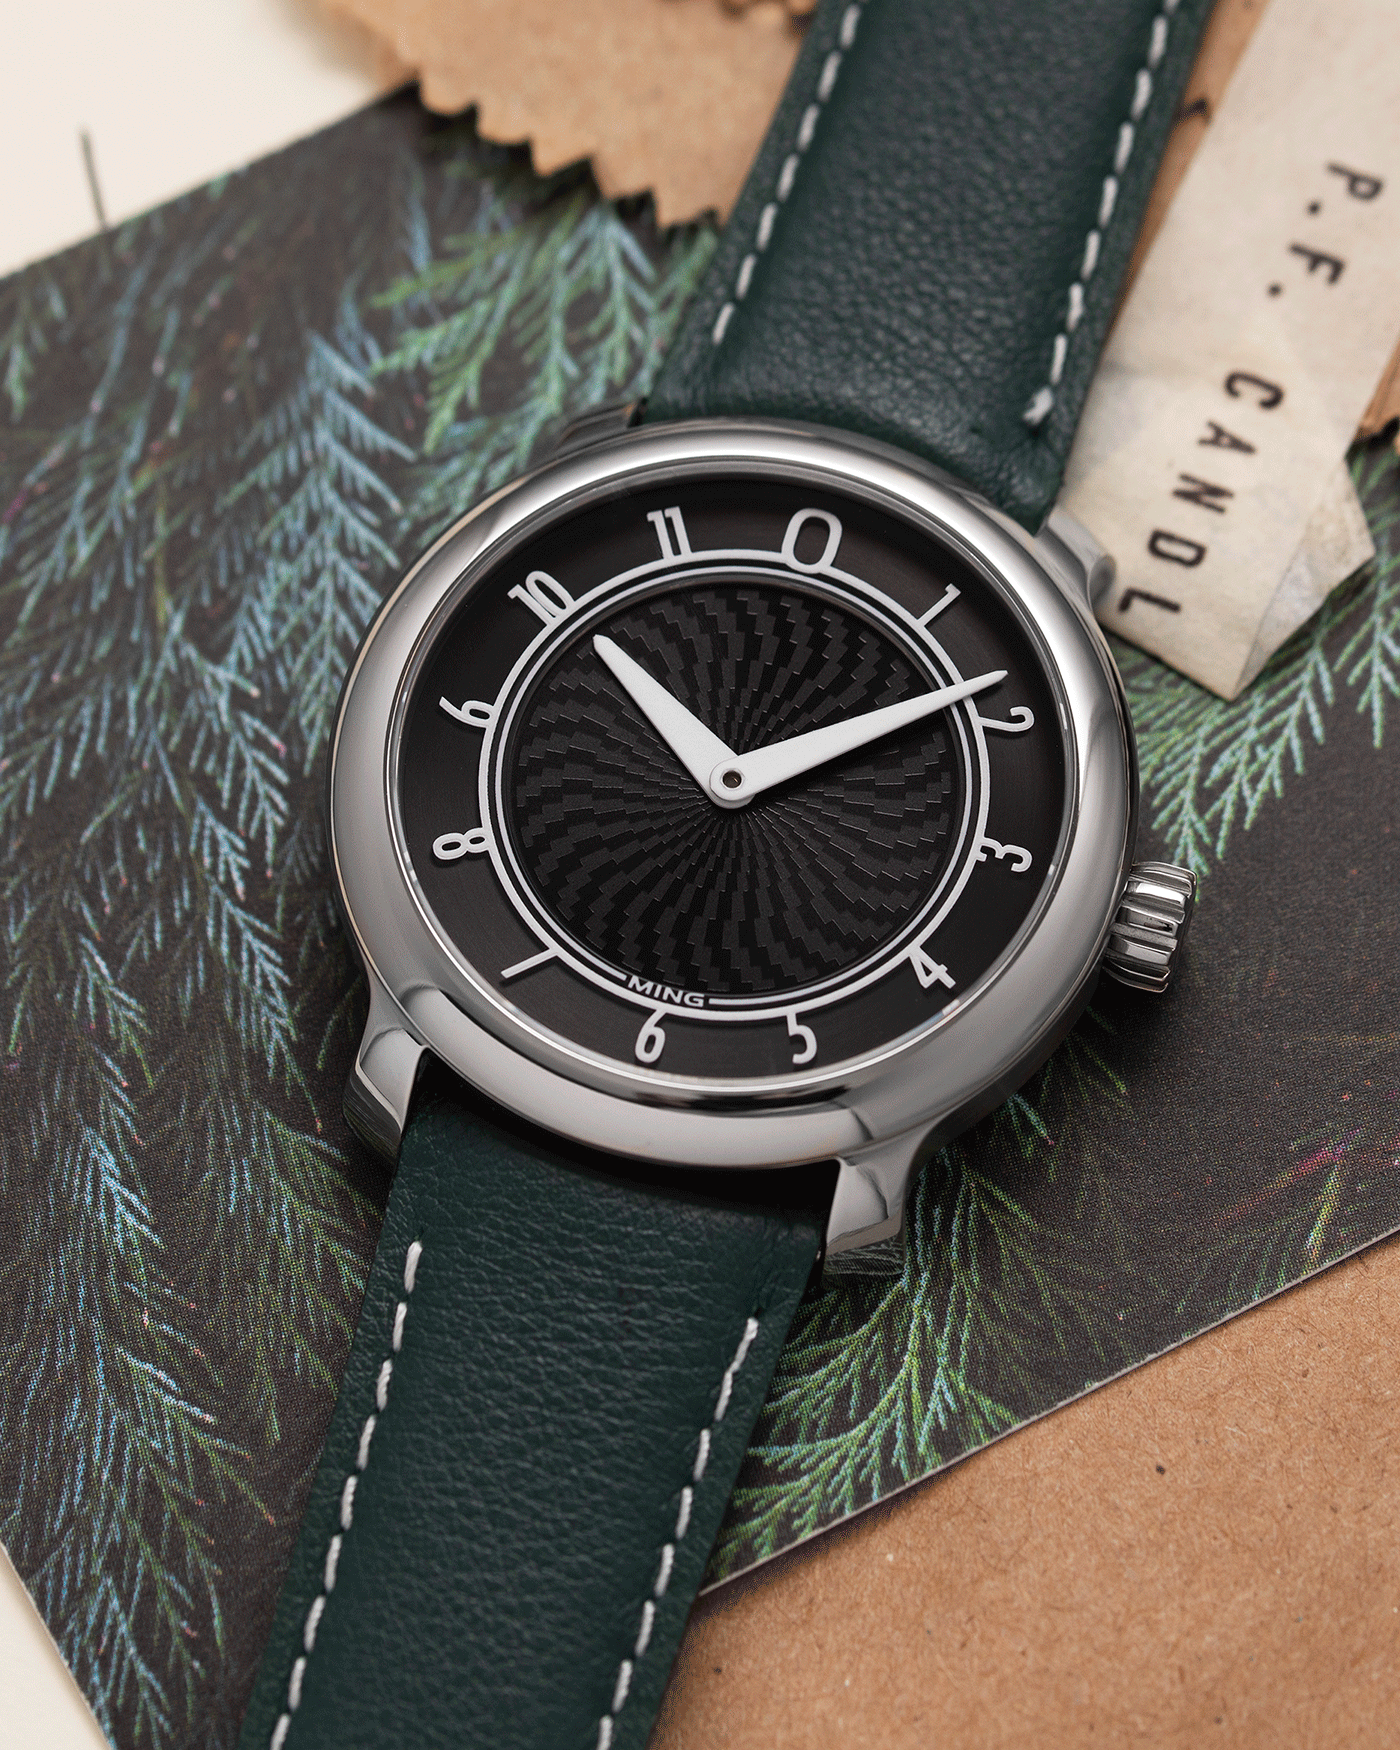 Brand: Ming Year: 2017 Model: 17.01 Material: Grade 5 Titanium Movement: Hand-winding mechanical movement Sellita SW210-1 Case Diameter: 38mm Strap: Jean Rousseau Green Smooth Calf for MING